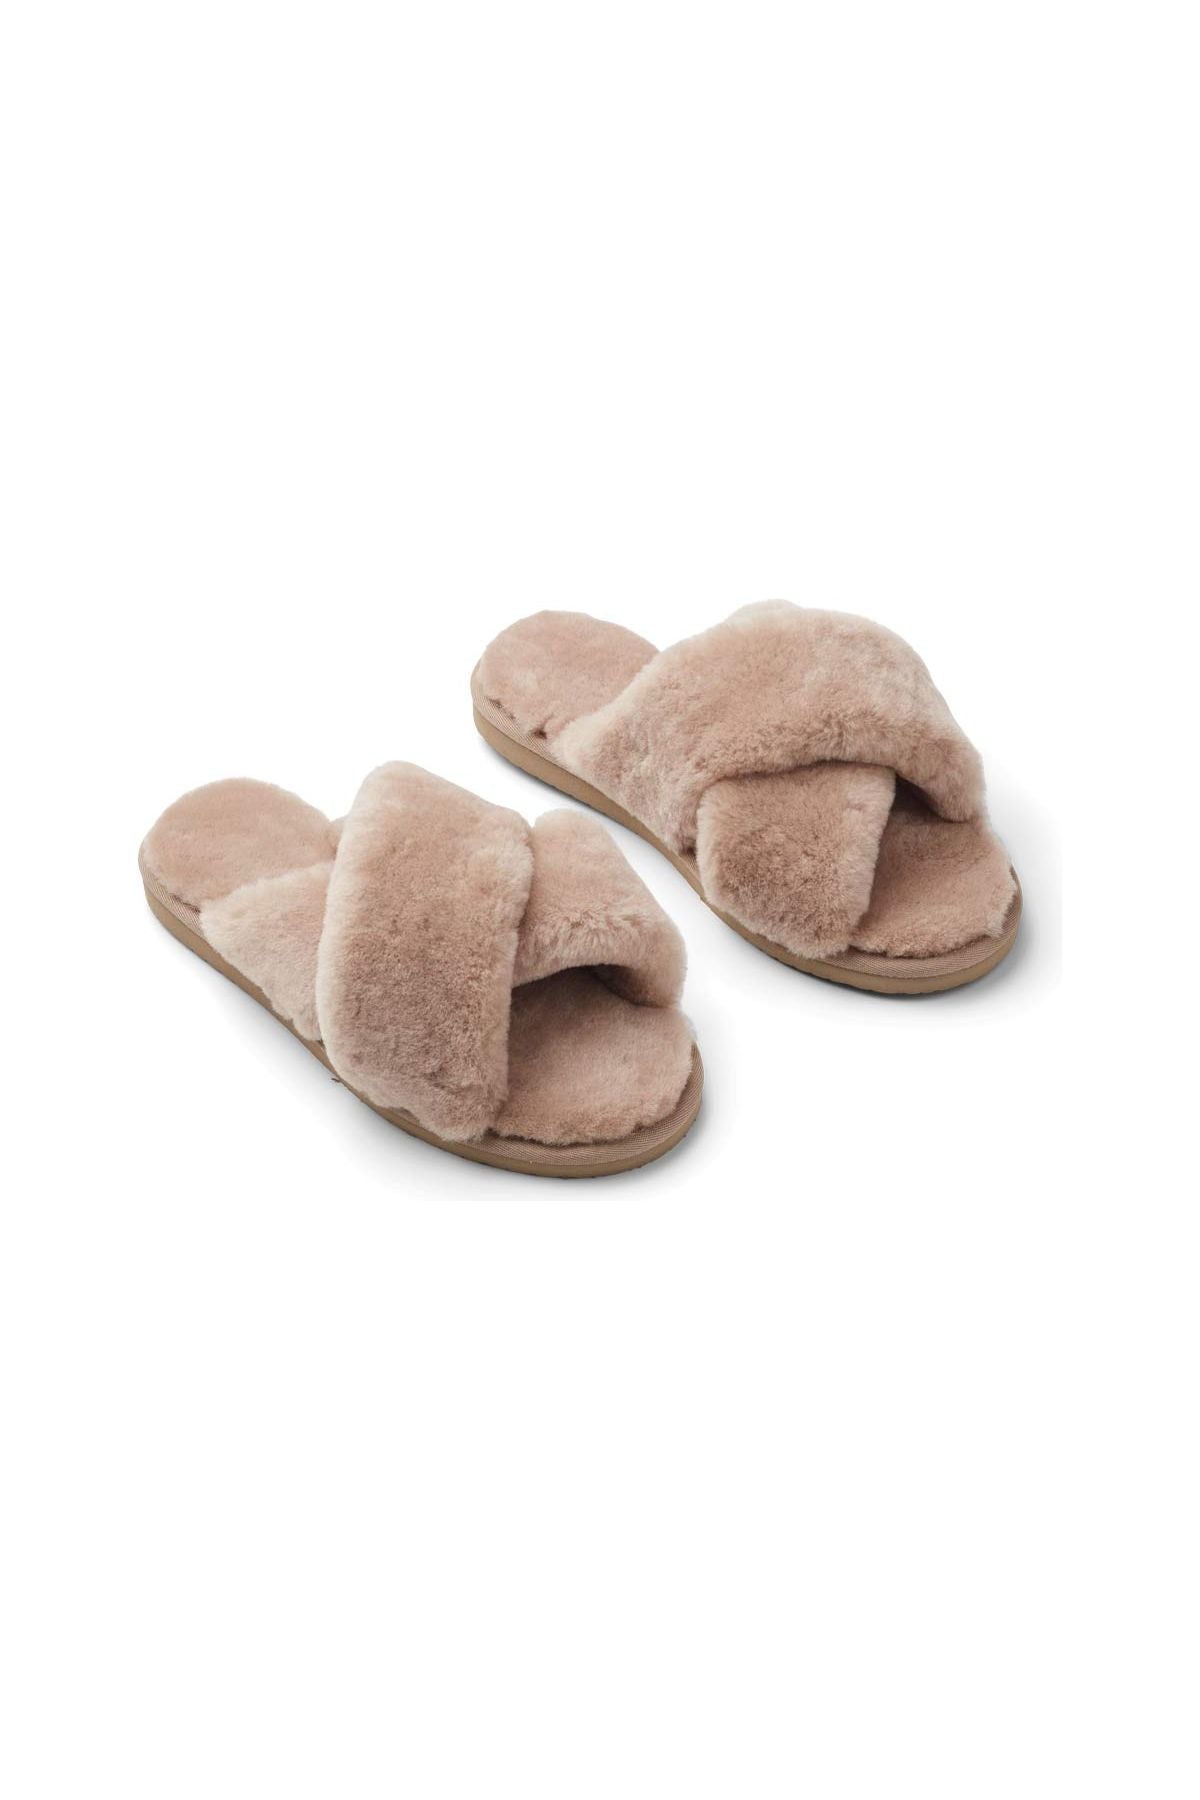 Natures Collection Criss Cross Sheepskin Slippers NCF1049 Teddy – Madison